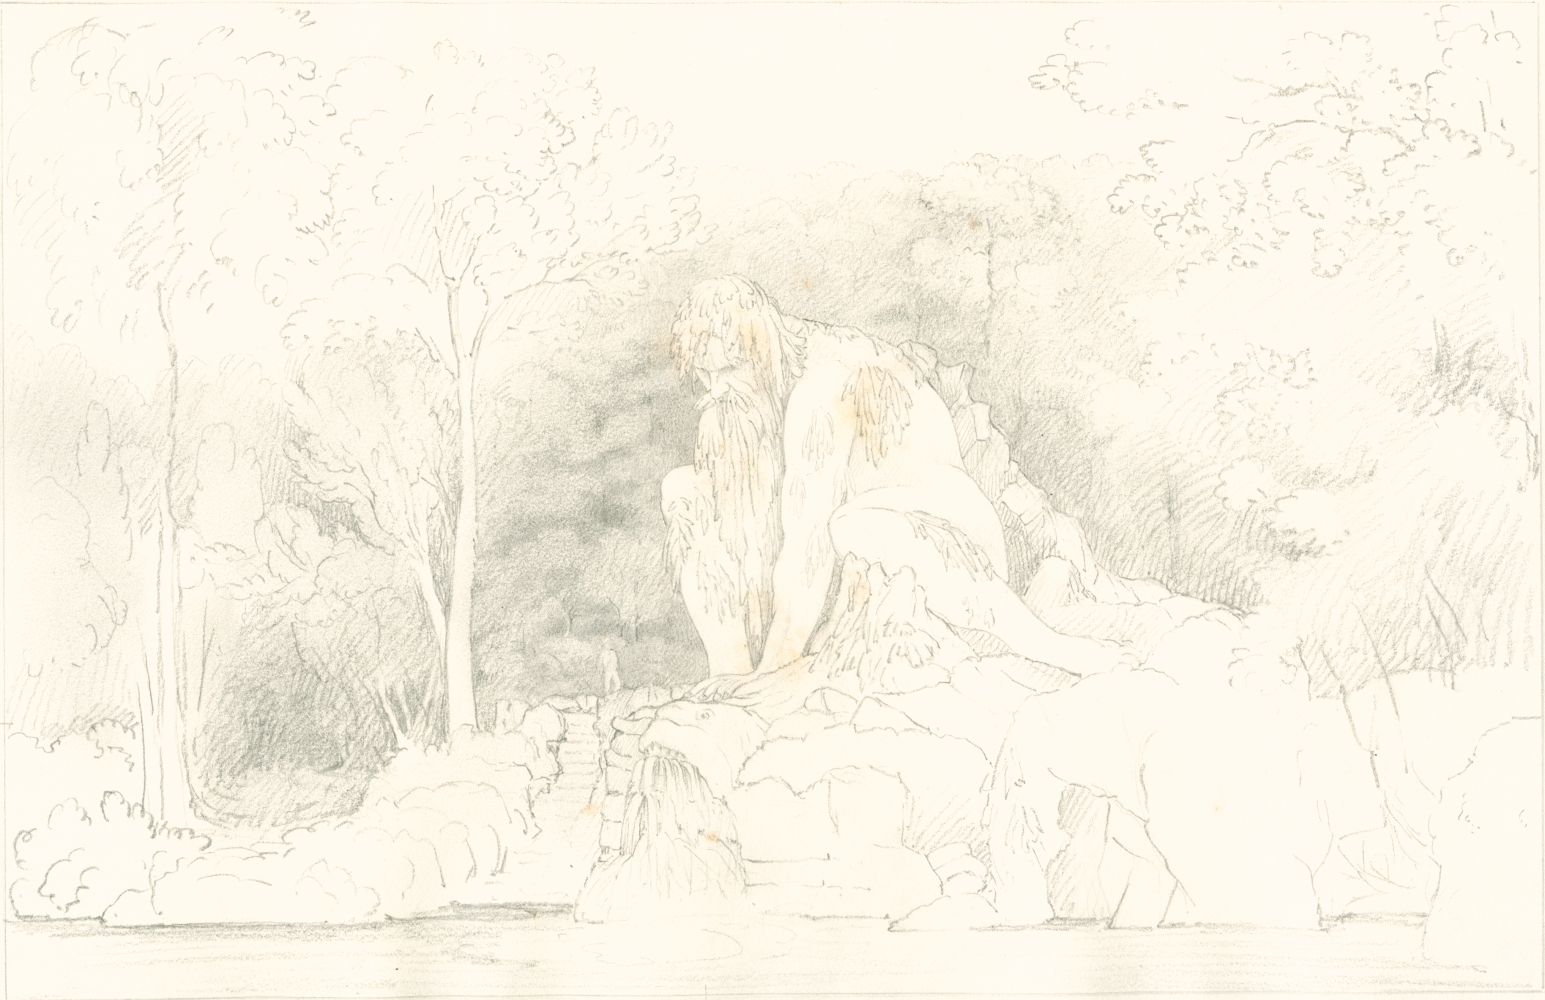 Sir John Frederick William HERSCHEL (English, 1792-1872) "No 358 Colossal Statue ‘Father Apennine’ by John of Bologna in the Grand-ducal garden of Pratolino near Florence” , 1824 Camera lucida drawing, pencil on paper